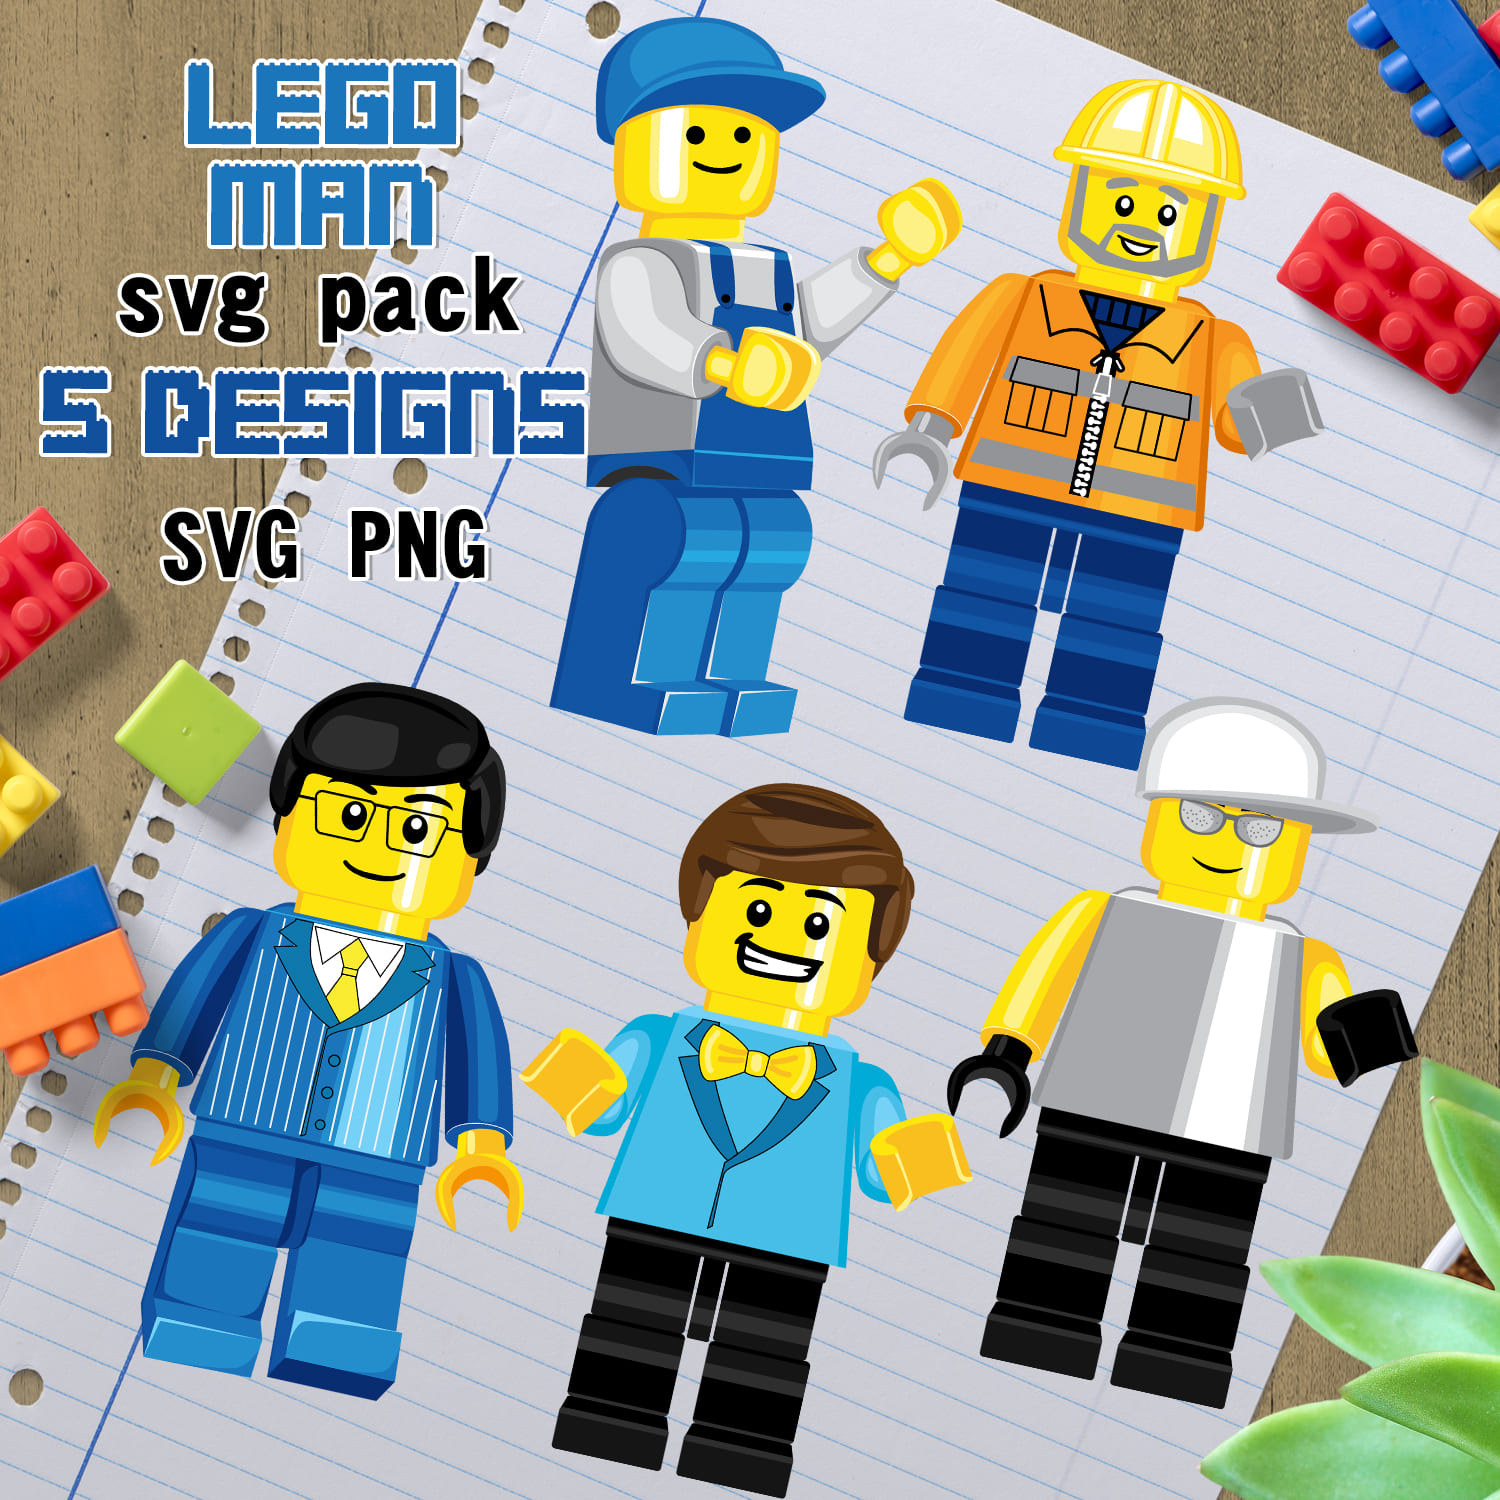 Lego man svg - main image preview.